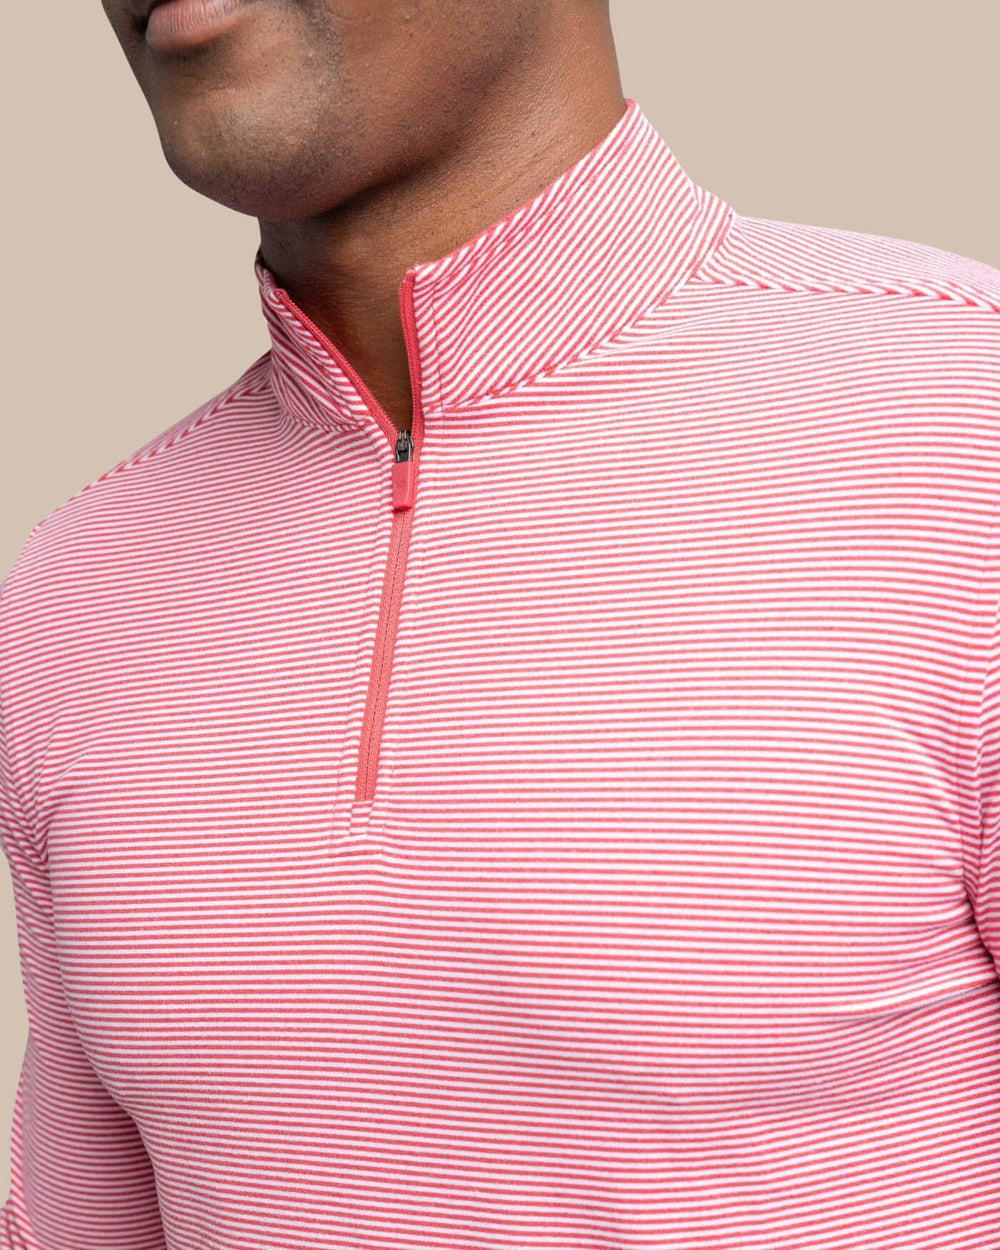 The detail view of the Southern Tide Cruiser Micro-Stripe Heather Quarter Zip by Southern Tide - Heather Varsity Red